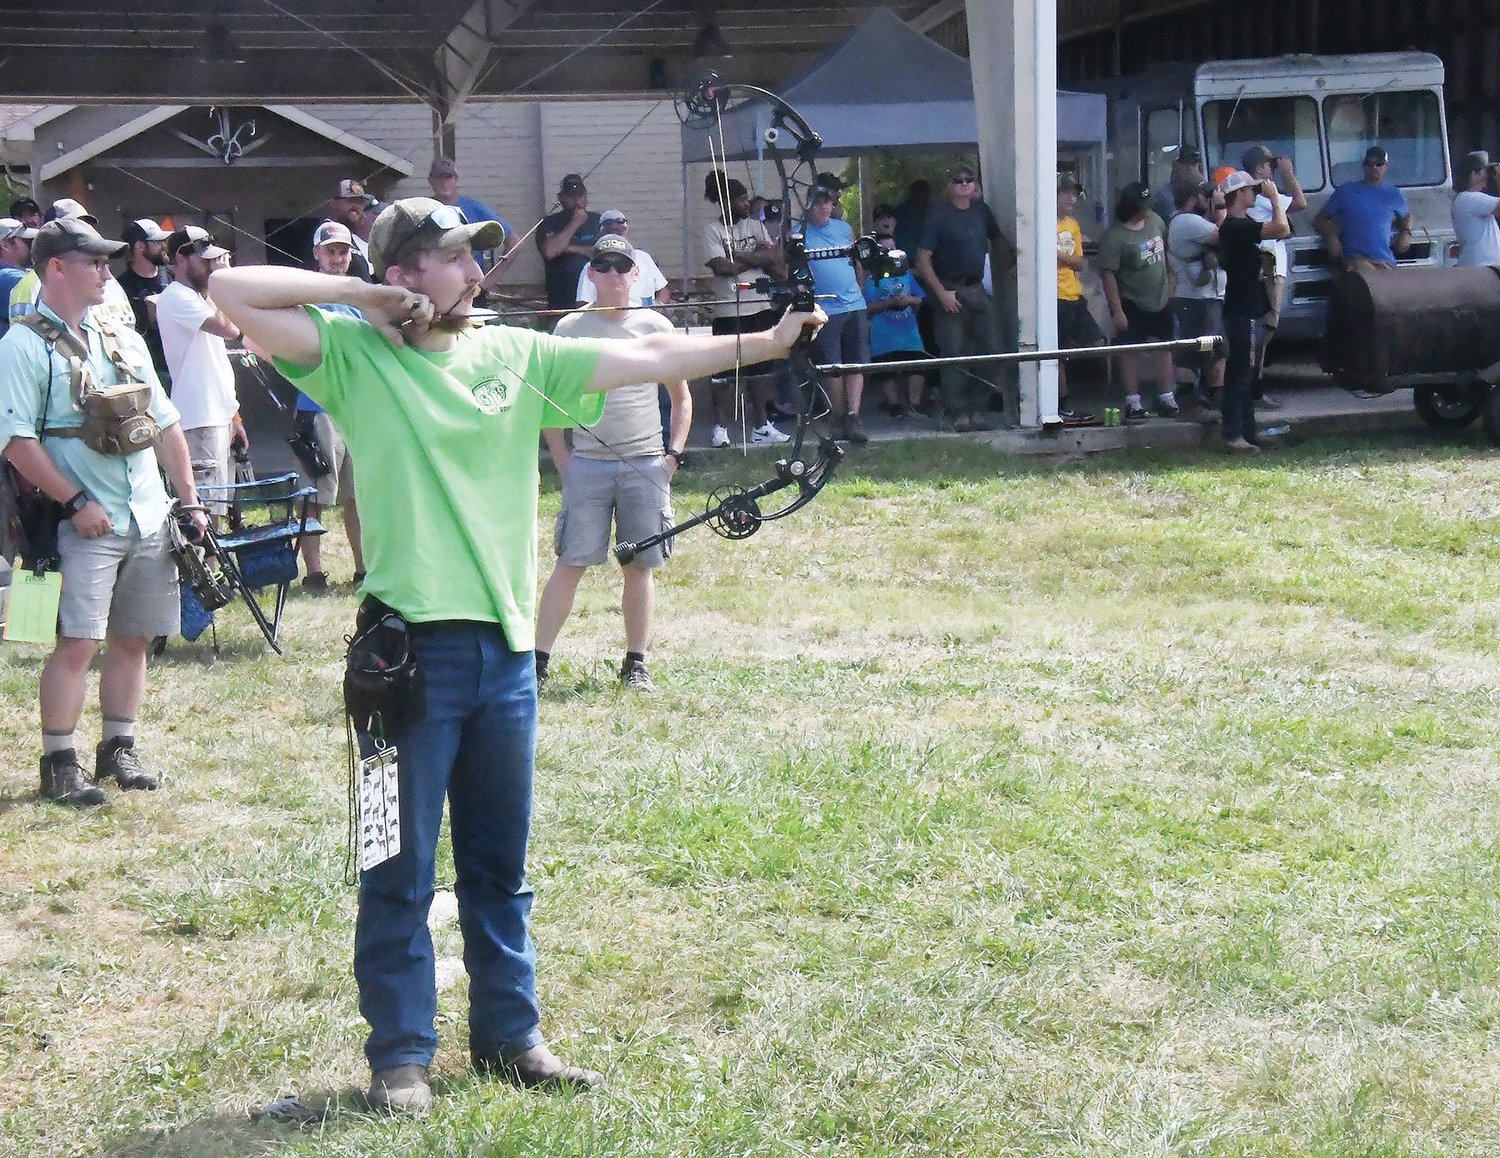 Hunter Stephens, a resident of nearby Clark, prepares to shoot an arrow during the Badlands Iron Buck competition on Sunday, Aug. 14. Stephens also finished third in men’s open unlimited (North American Range) and fourth in the Safari Range. For finishing among the top-five, he received a pair of pins for his marksmanship.